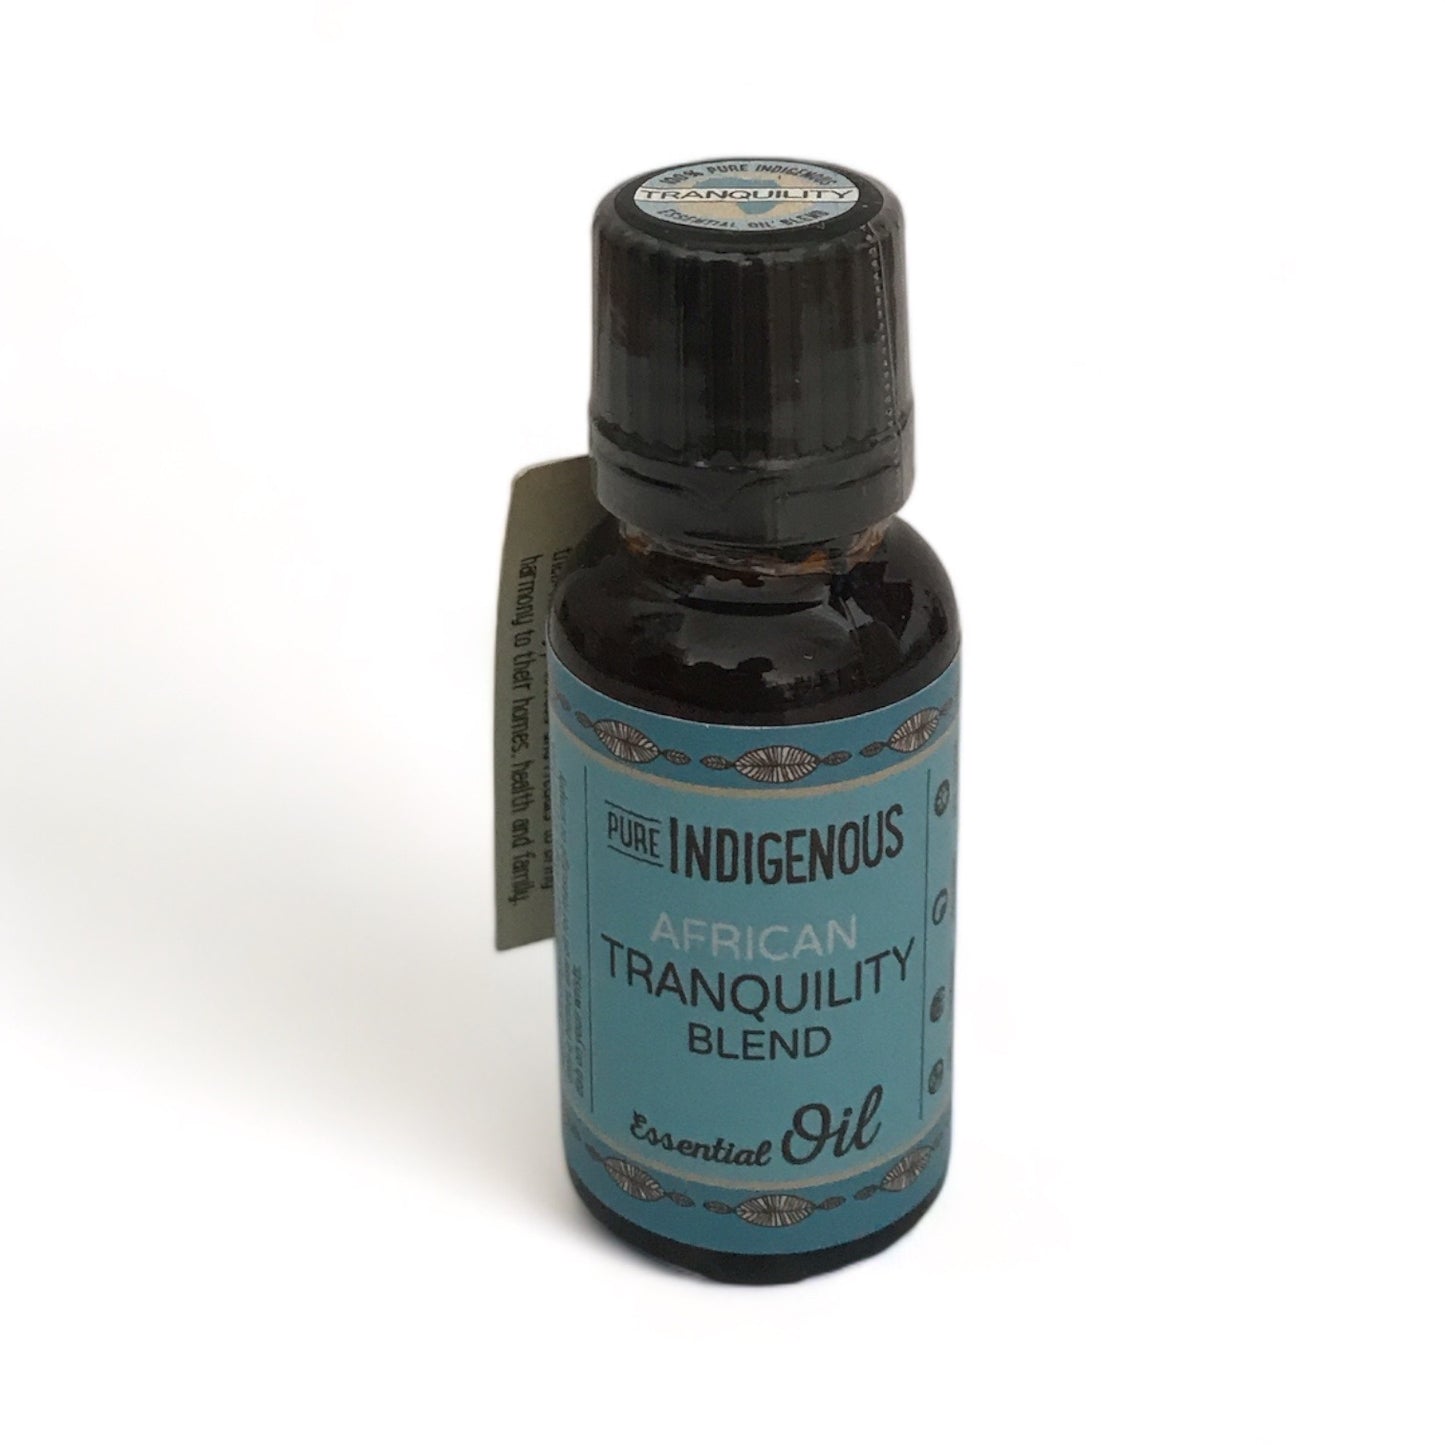 African Tranquility Blend Essential Oil - Pure Indigenous